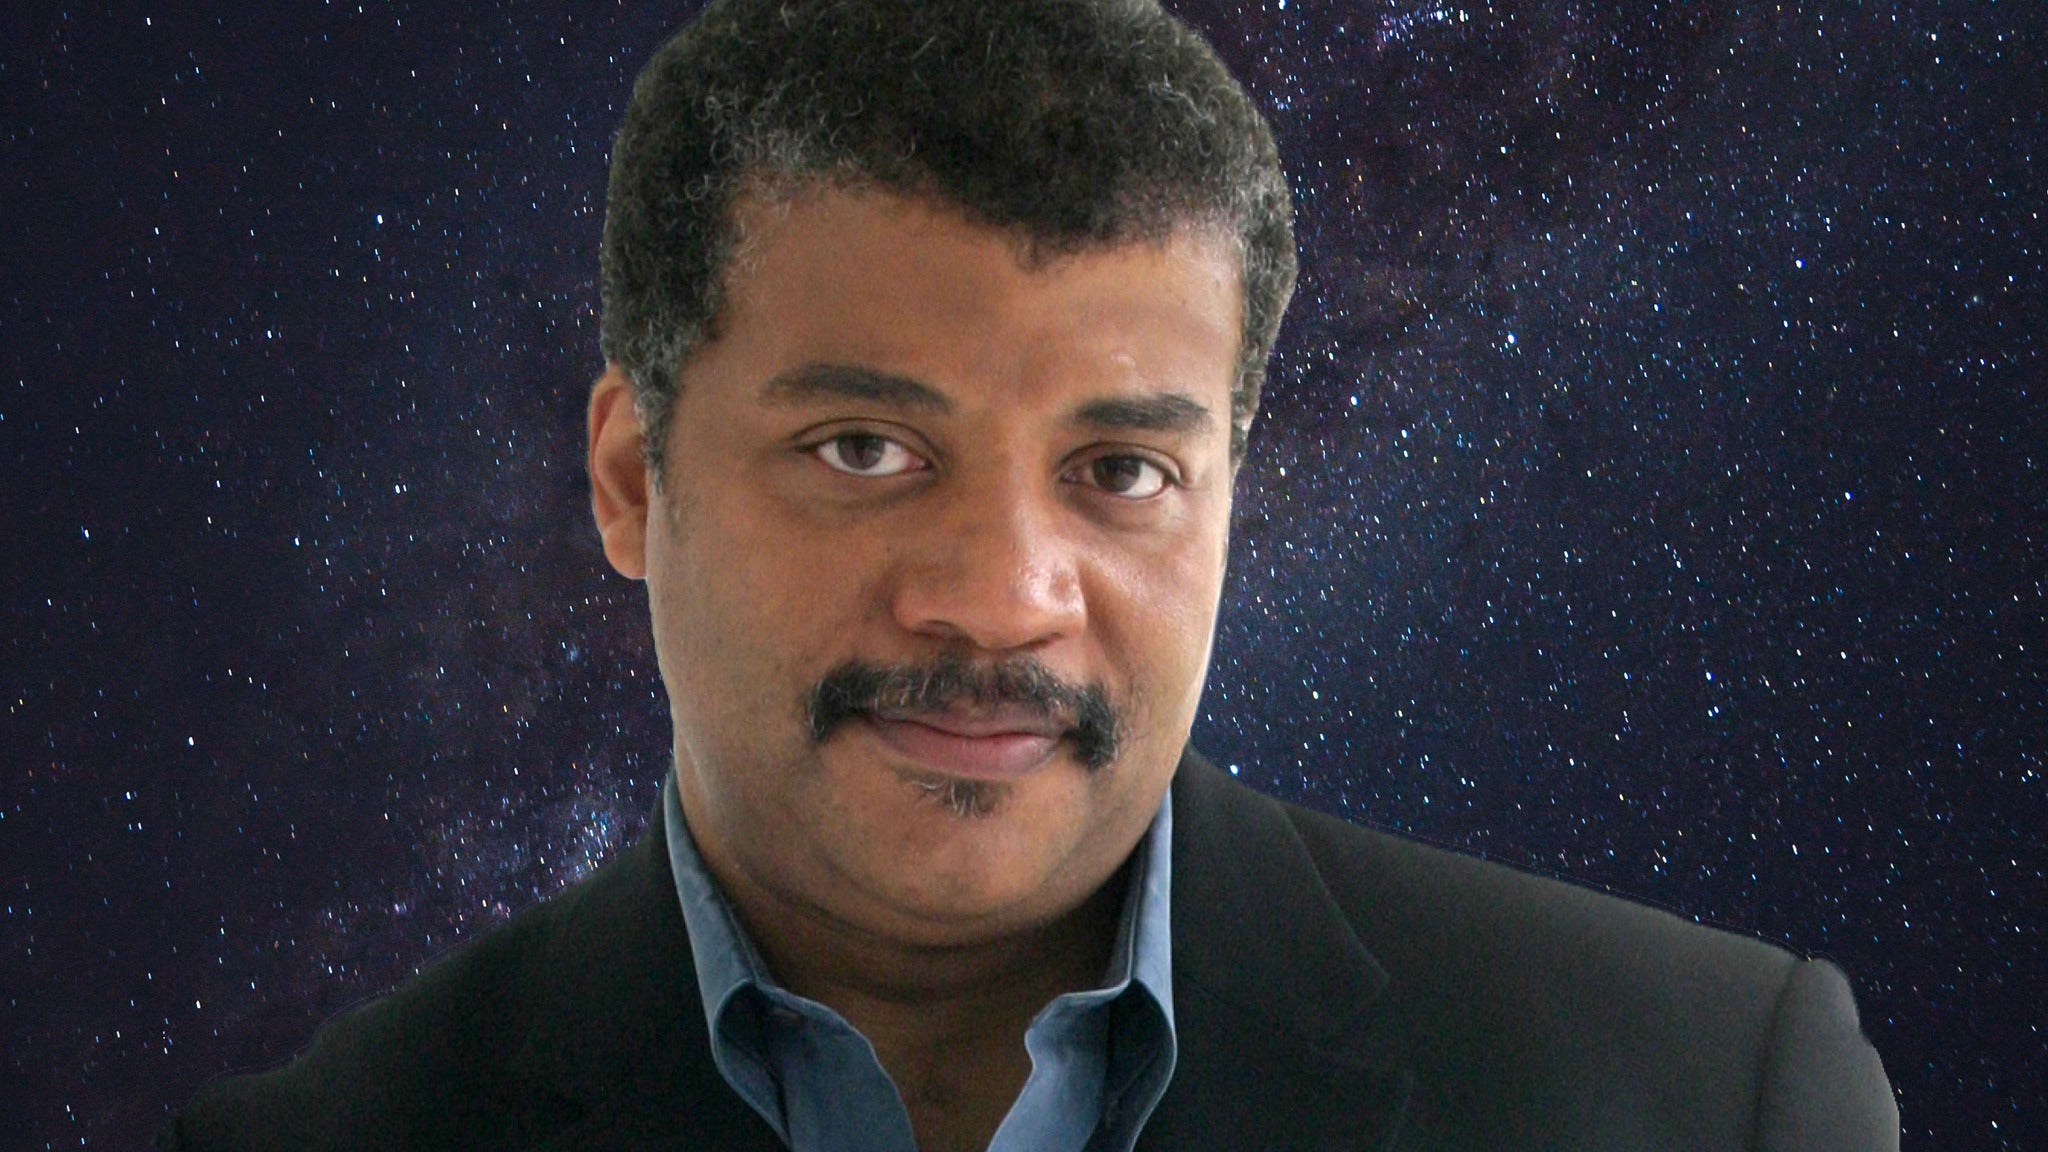 Neil deGrasse Tyson: The Search for Life in the Universe